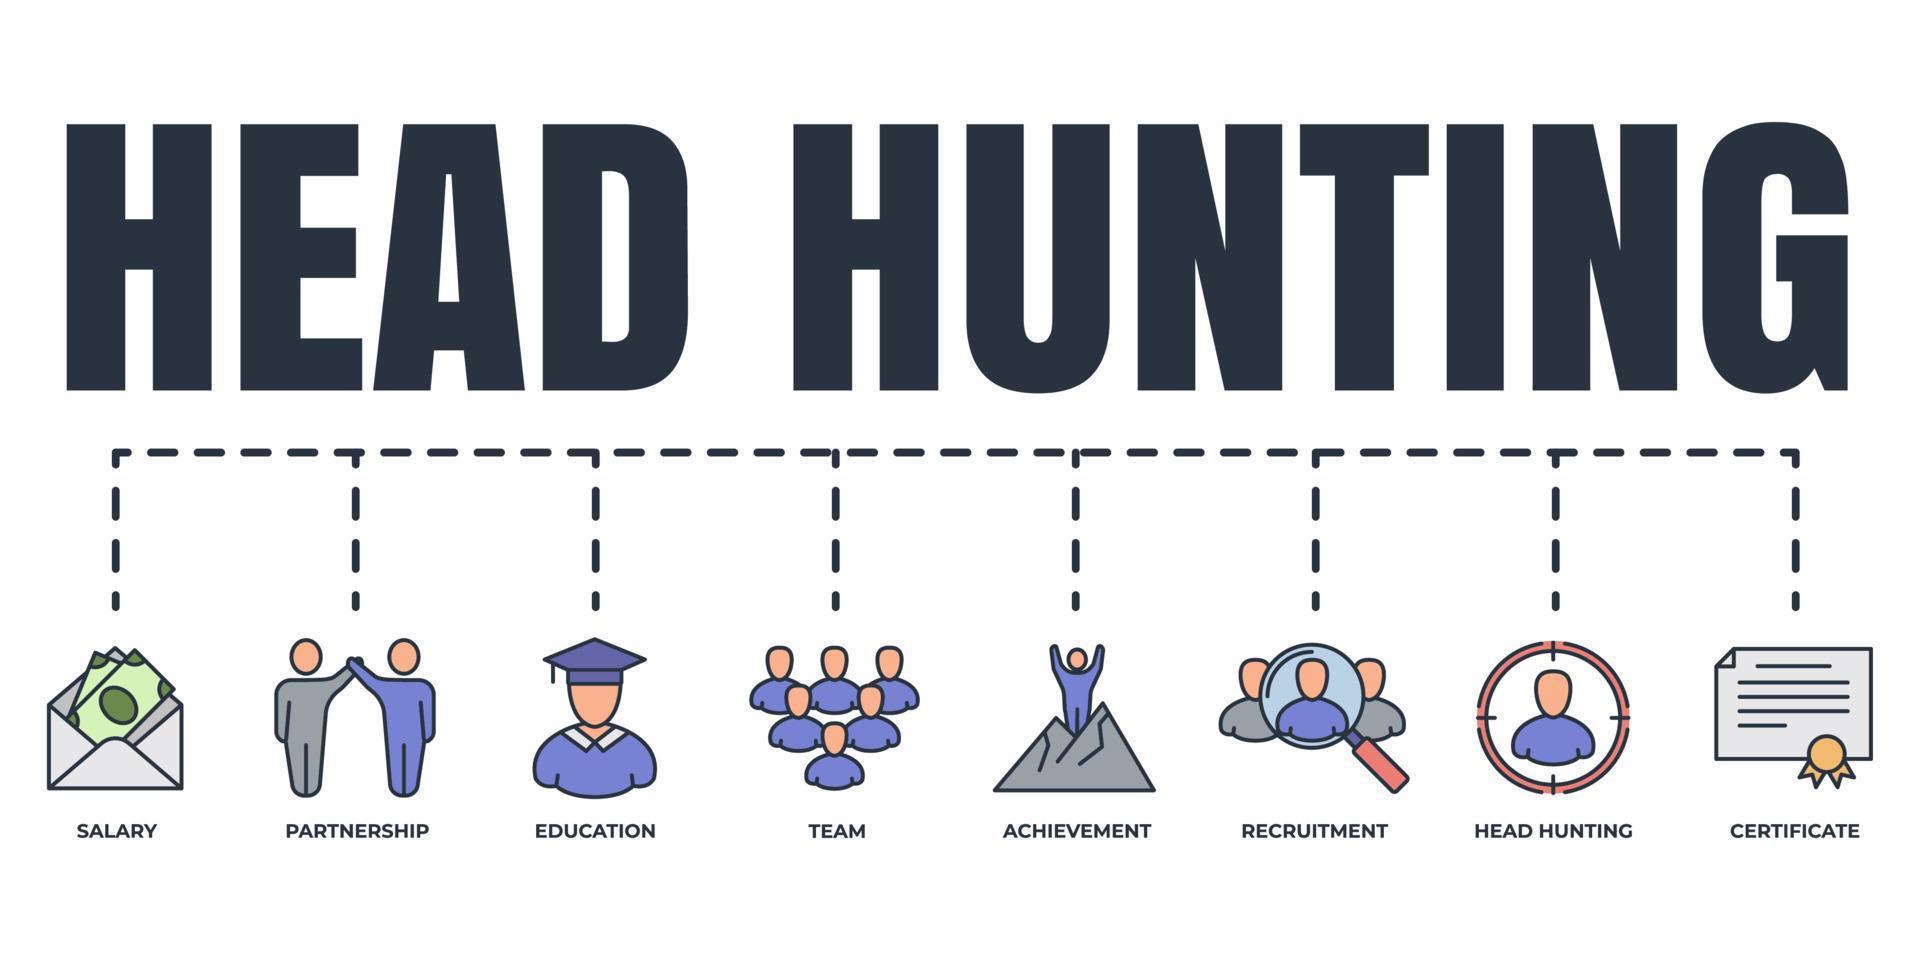 Head Hunting banner web icon set. education, recruitment, salary, achievement, head hunting, certificate, team, partnership vector illustration concept.